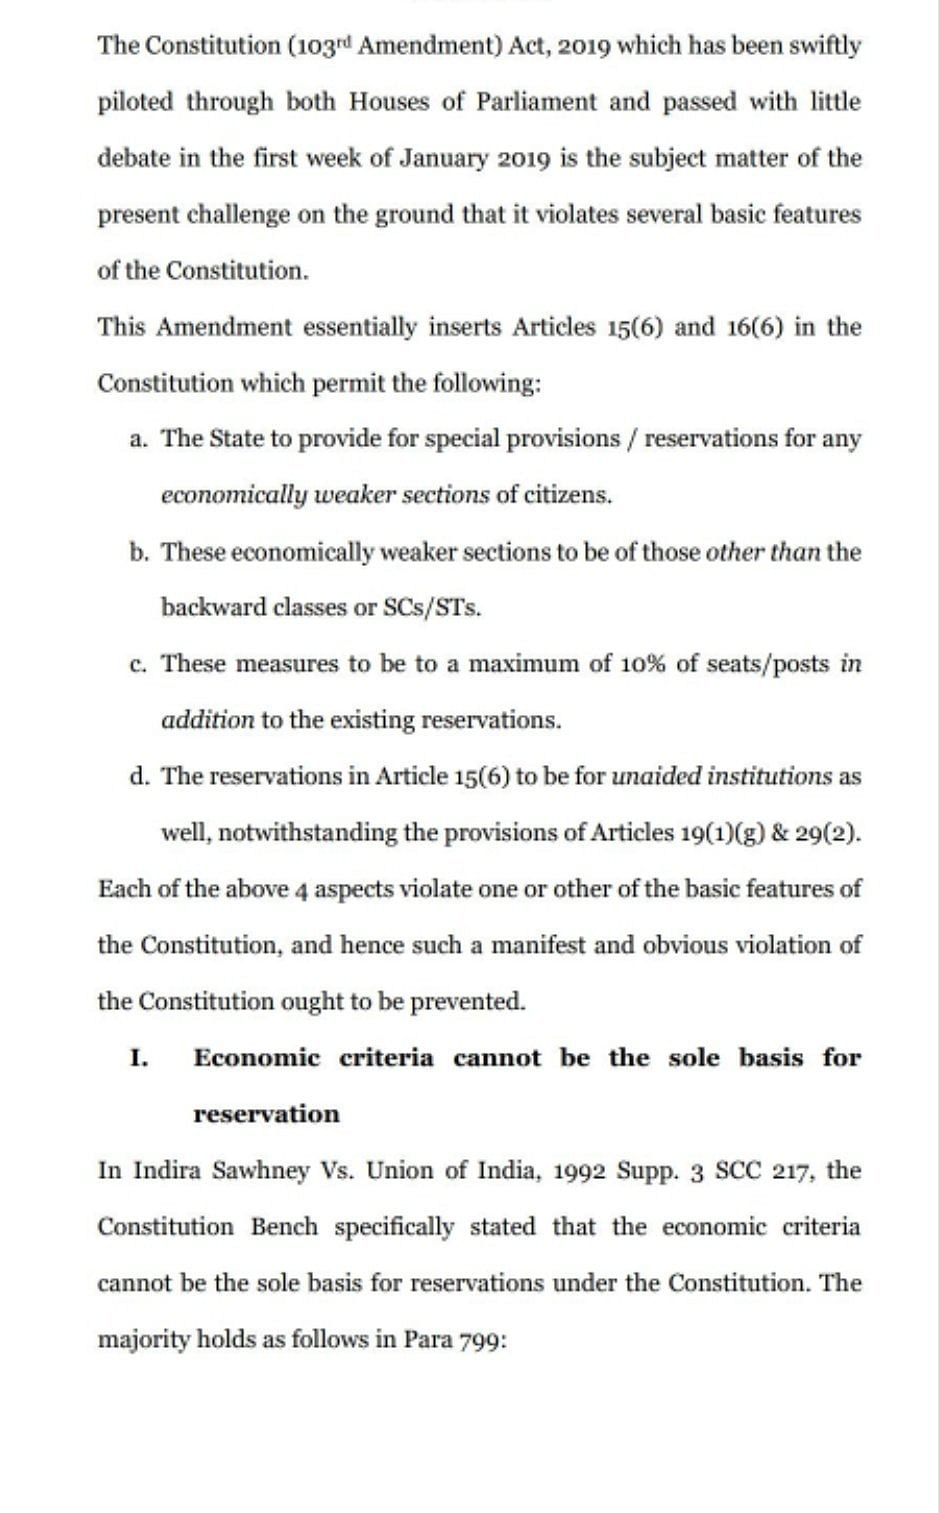 The Writ Petition has been filed on the grounds that it violates the Basic Structure of Constitution of India.